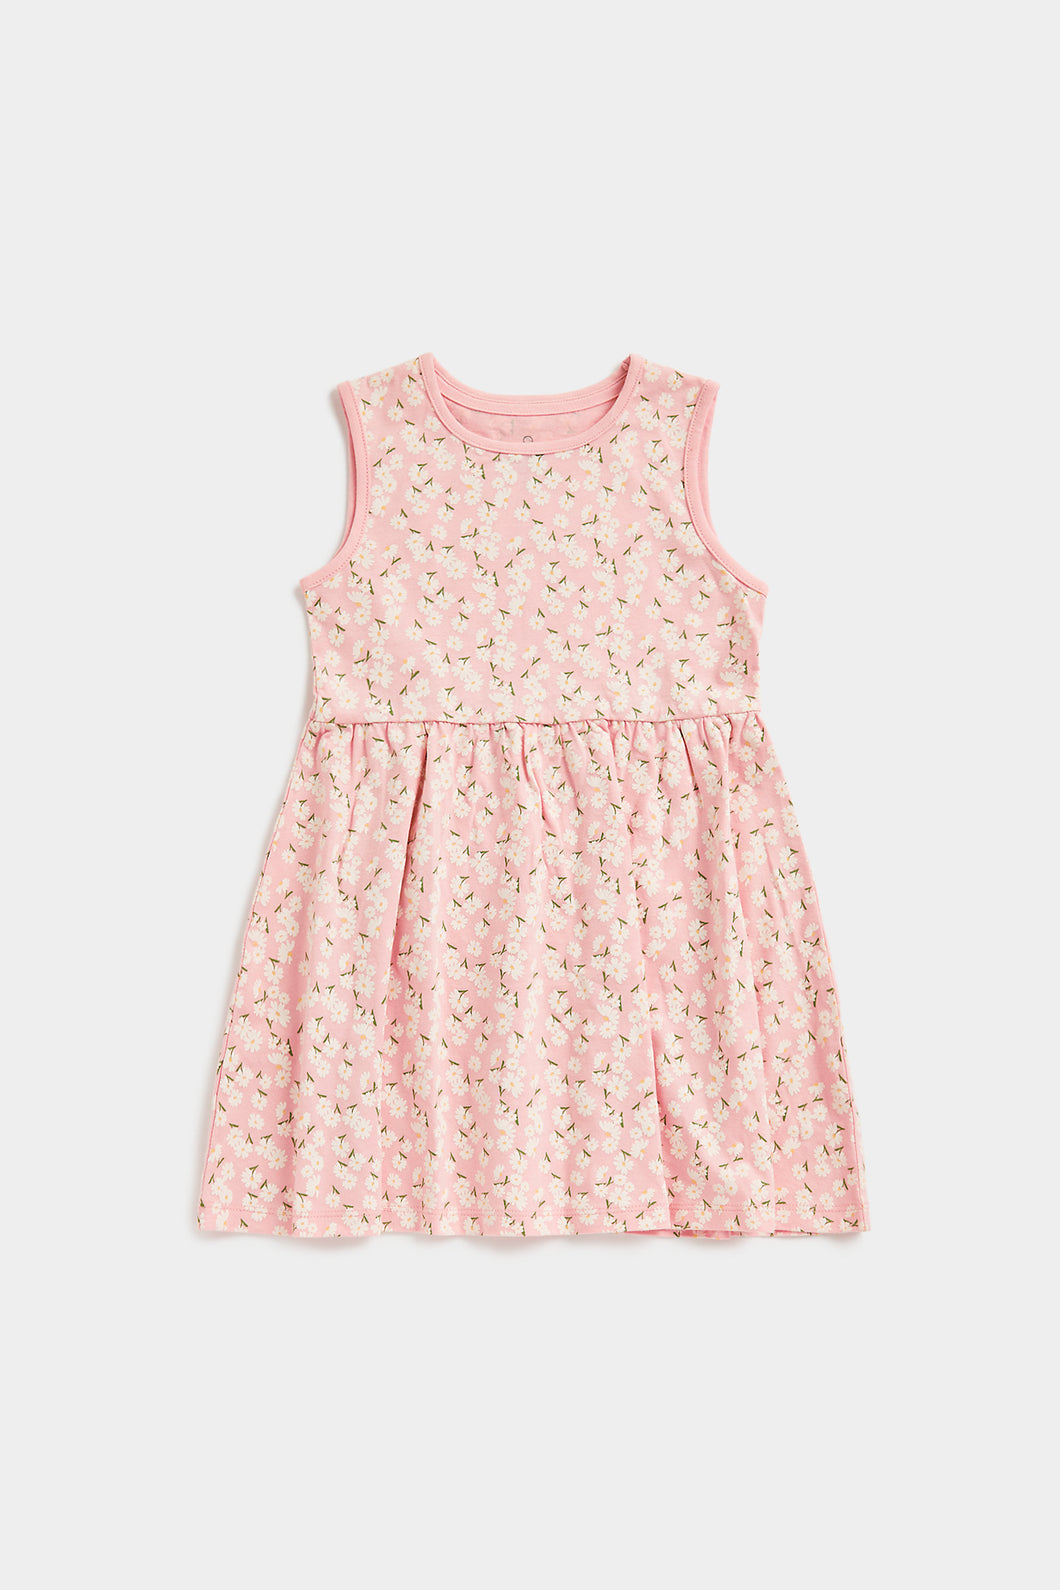 Mothercare Pink Floral Jersey Dress